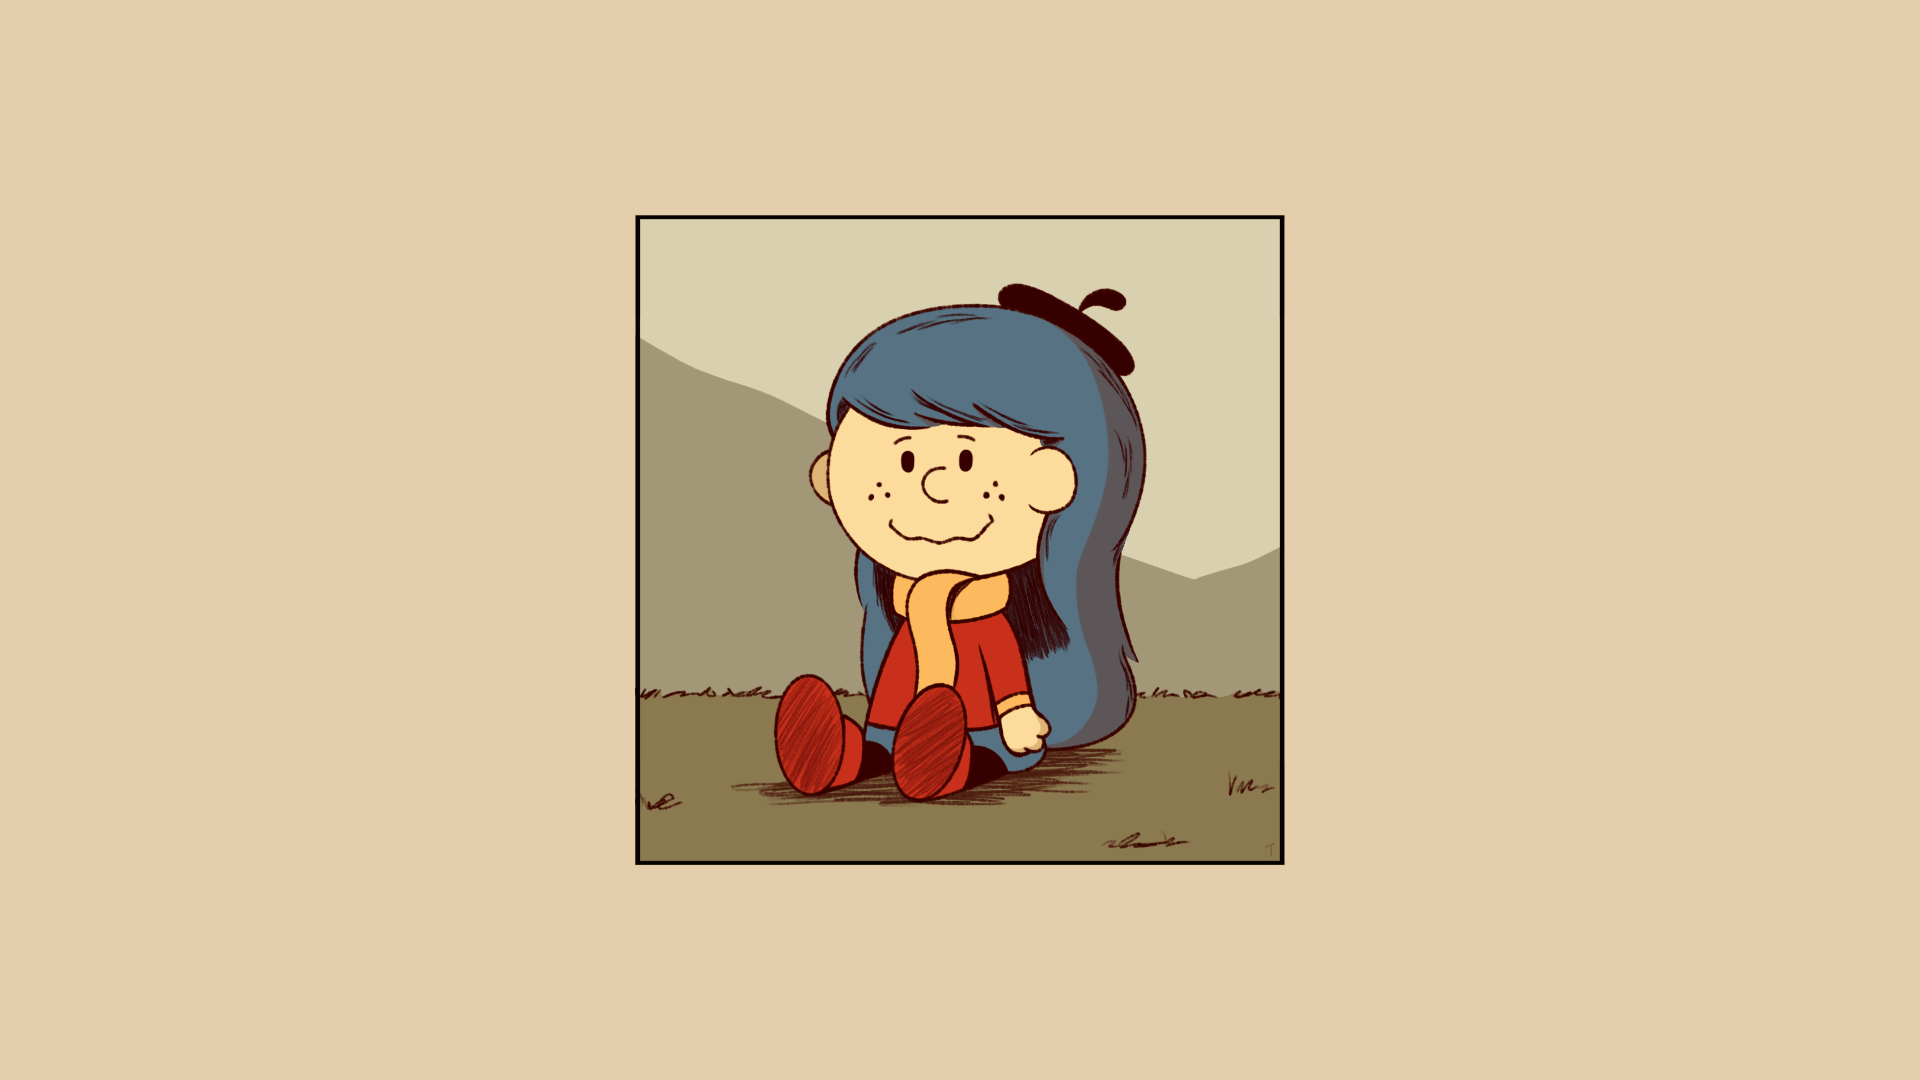 Cartoon Cartoon Girls Hilda Blue Hair Berets Scarf Shoes Red Shoes Smiling Sitting Grass Simple Back 1920x1080